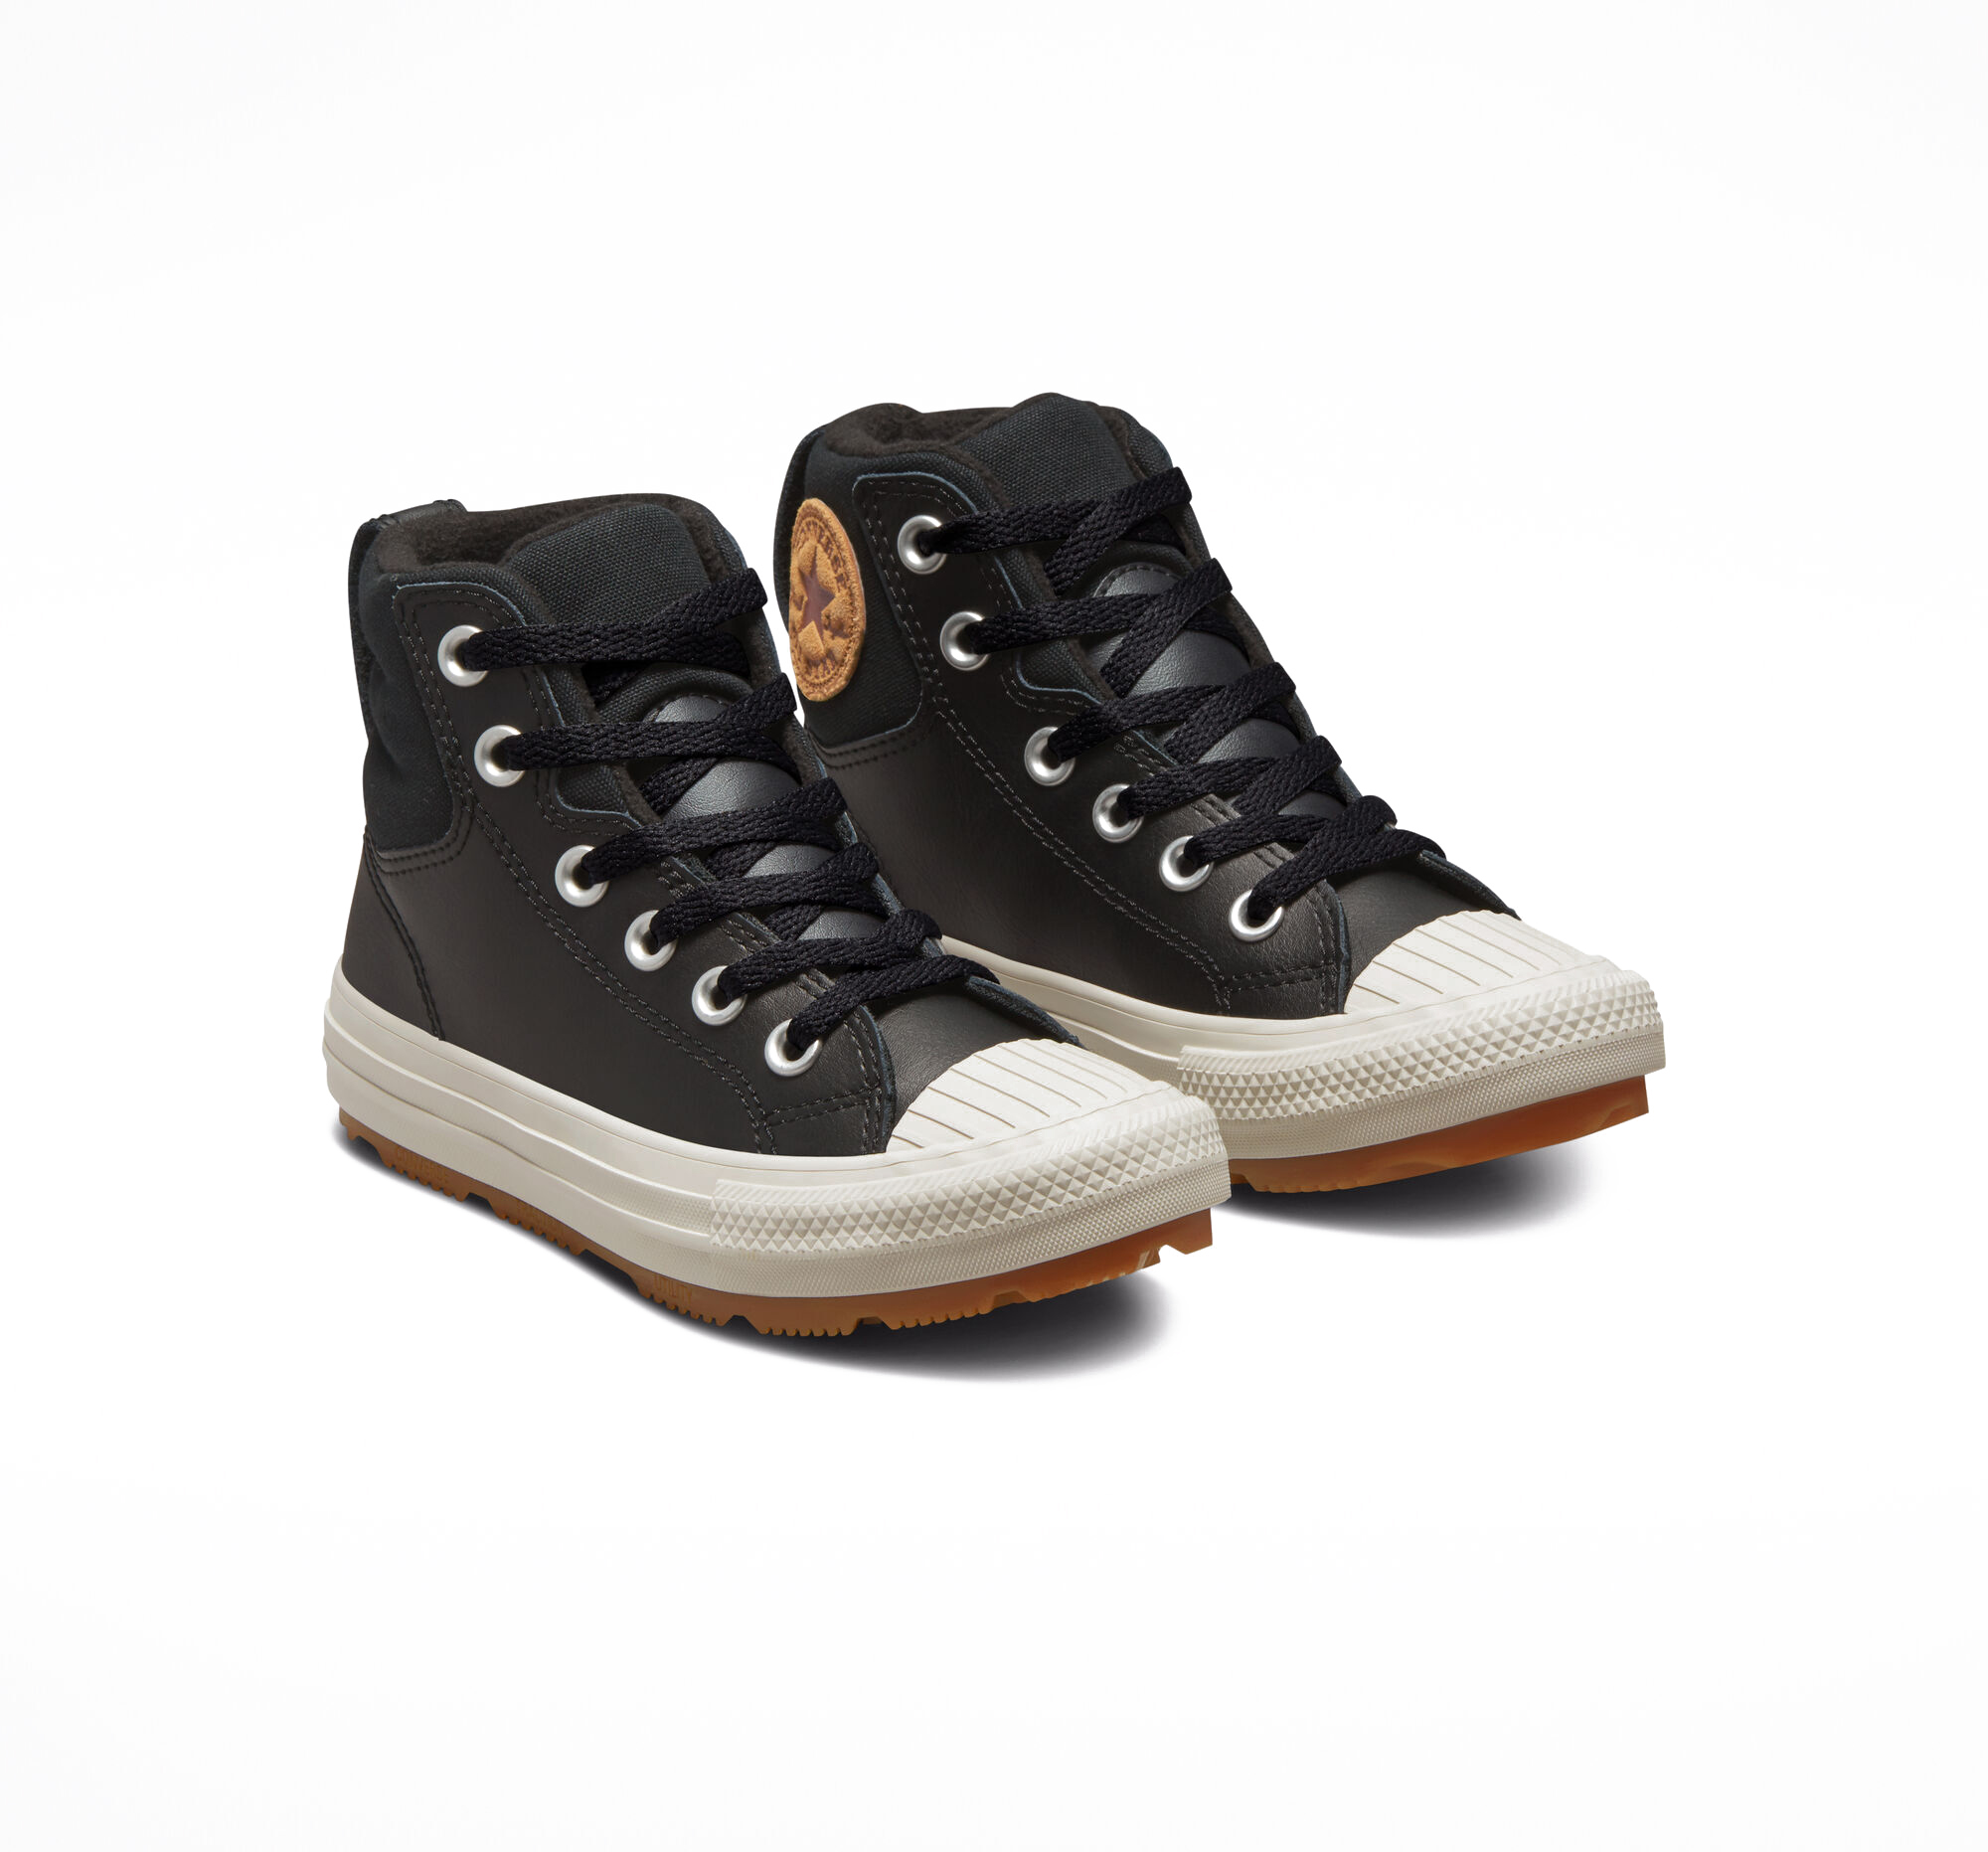 Converse Chuck Taylor All Star Berkshire Boot Kids - Black / Black / Pale Putty Leather